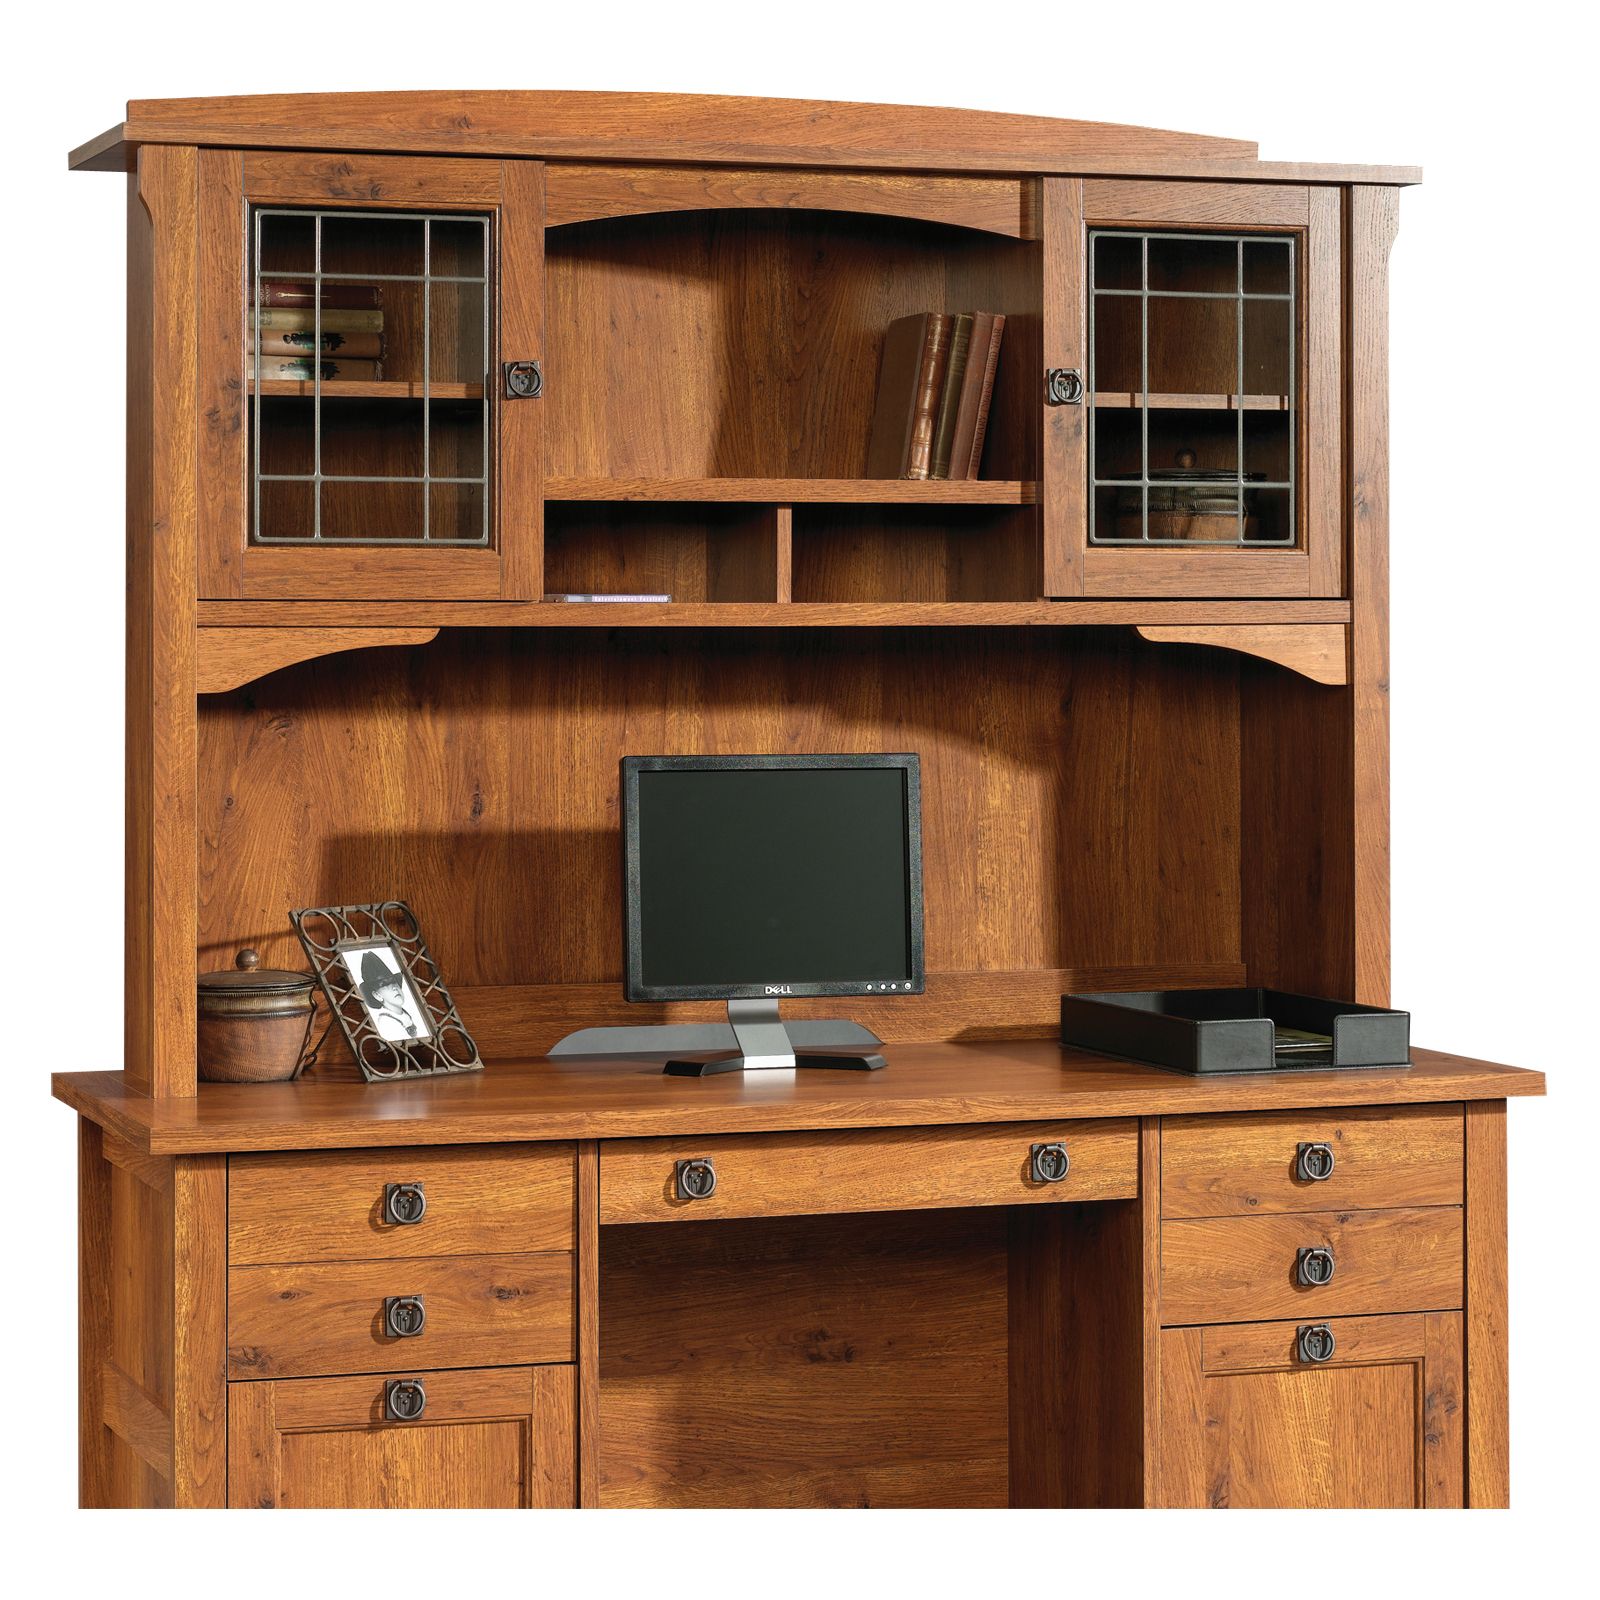 Desks | Buy A Home Office Desk At Hayneedle With Regard To White Traditional Desks Hutch With Light (View 15 of 15)